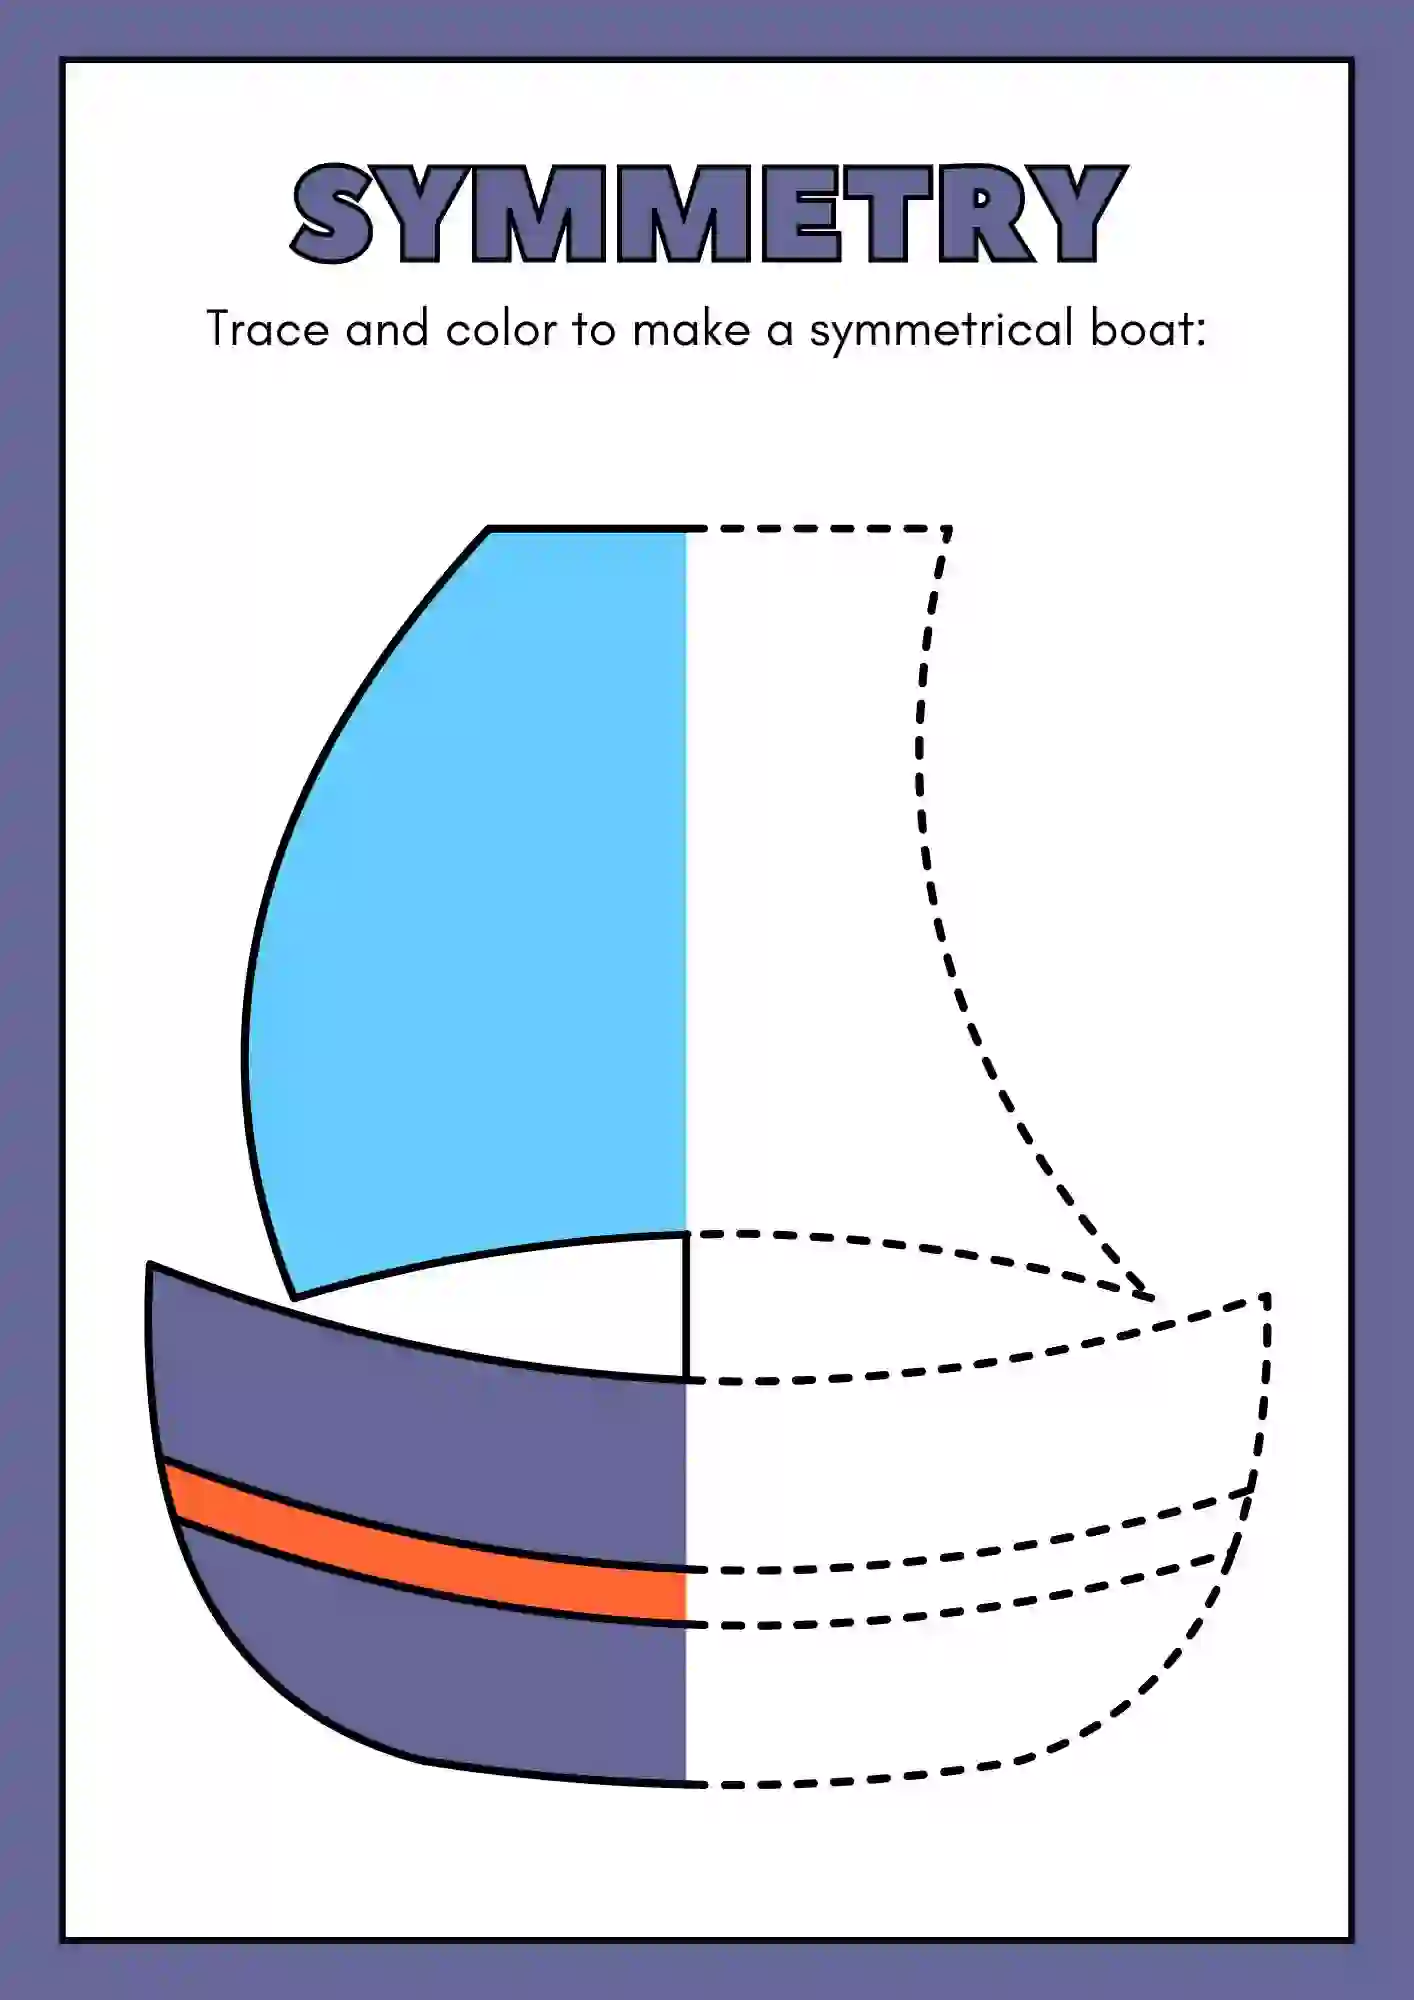 Symmetric Drawing and Coloring worksheets (ship)